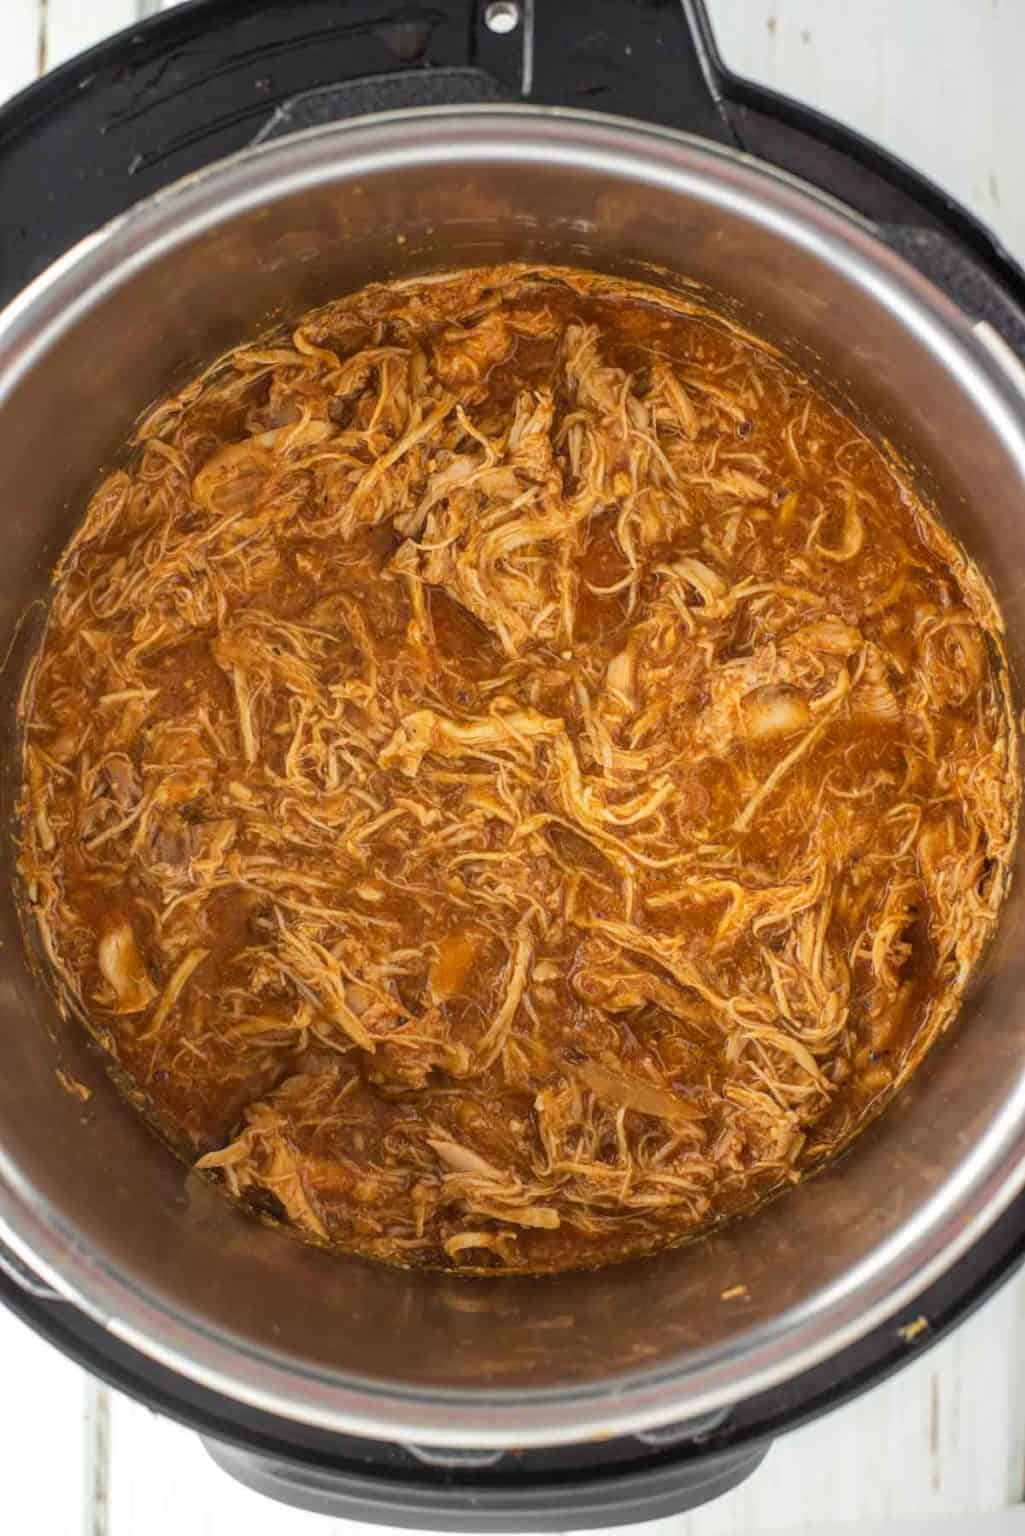 Instant Pot BBQ Chicken Recipe - Easy Weeknight Meal - Chisel & Fork